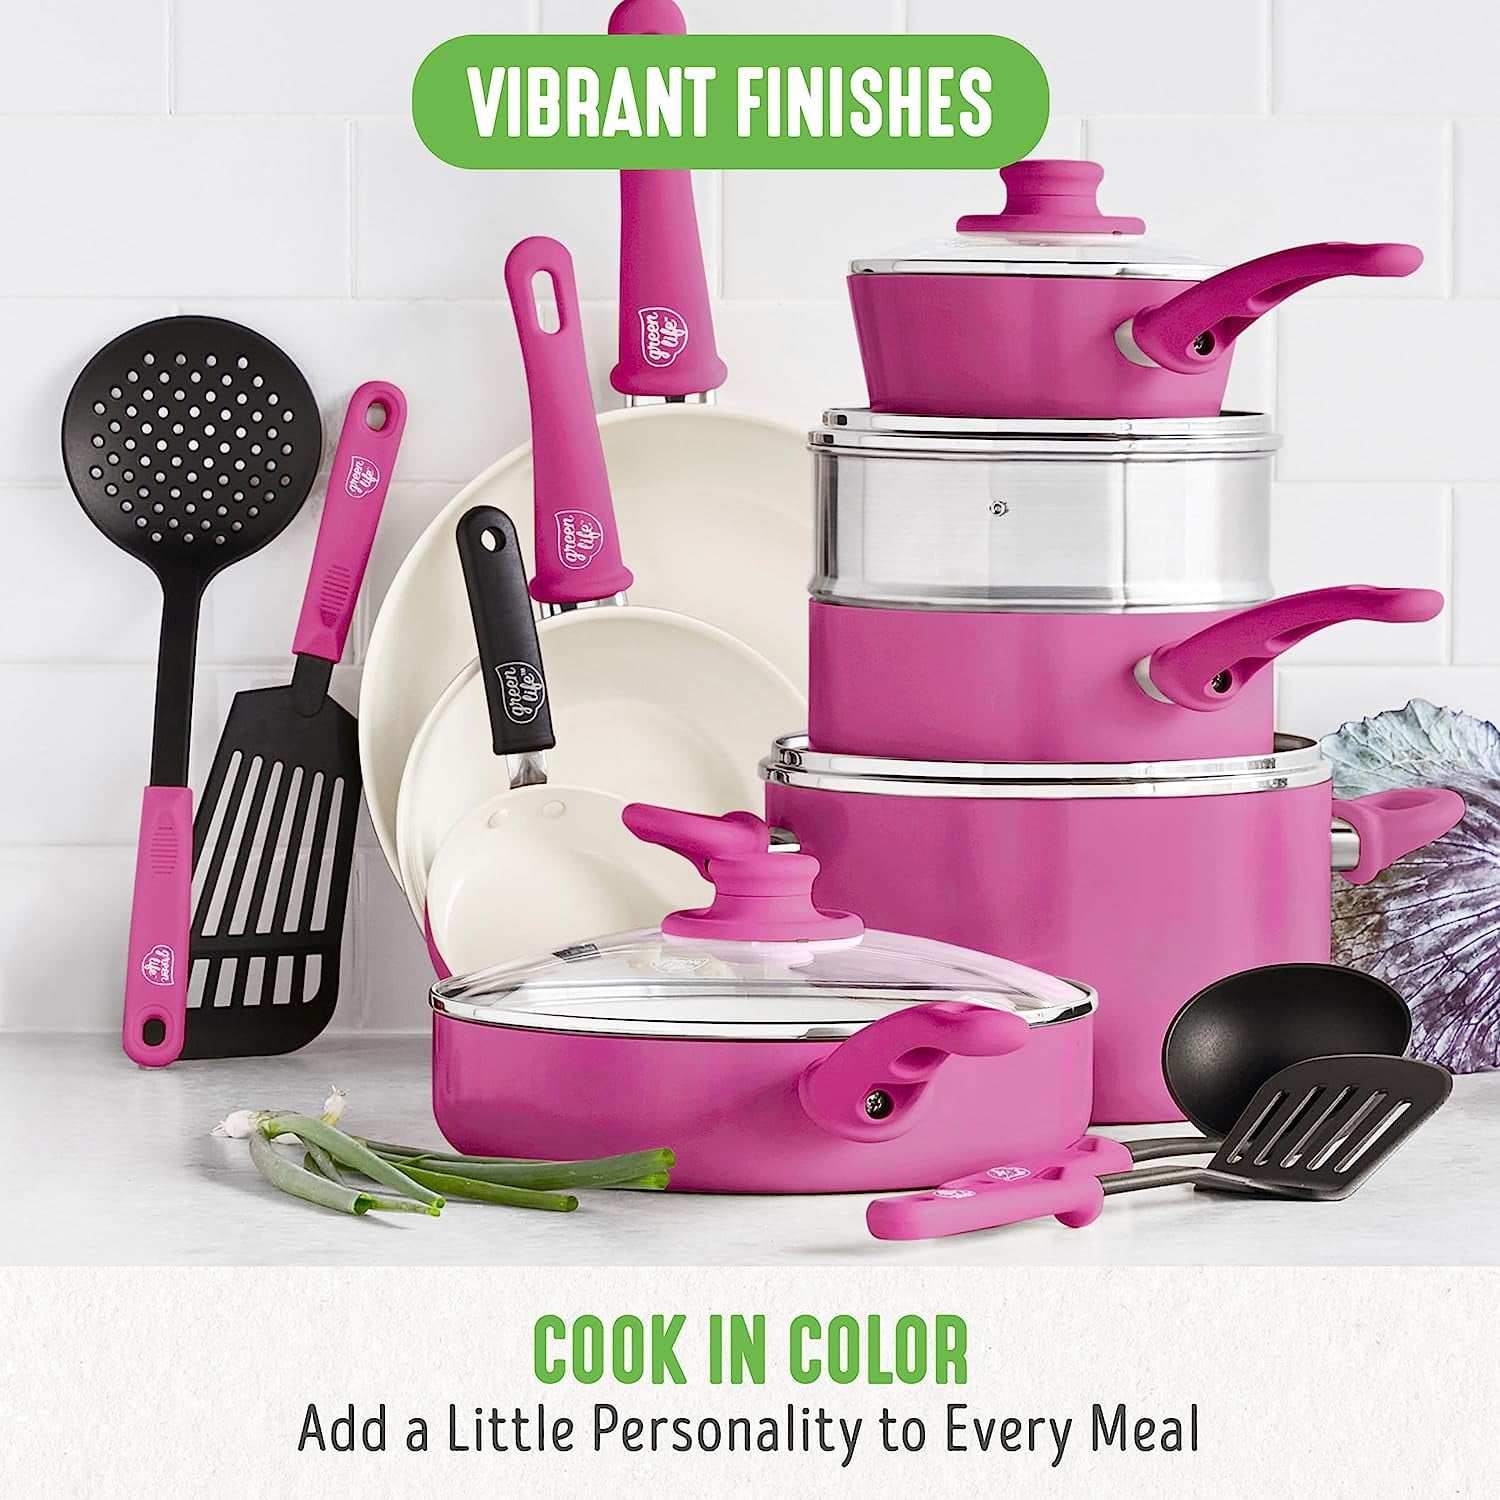 Upgrade your kitchen cookware with this pink ten-piece pot and pans se –